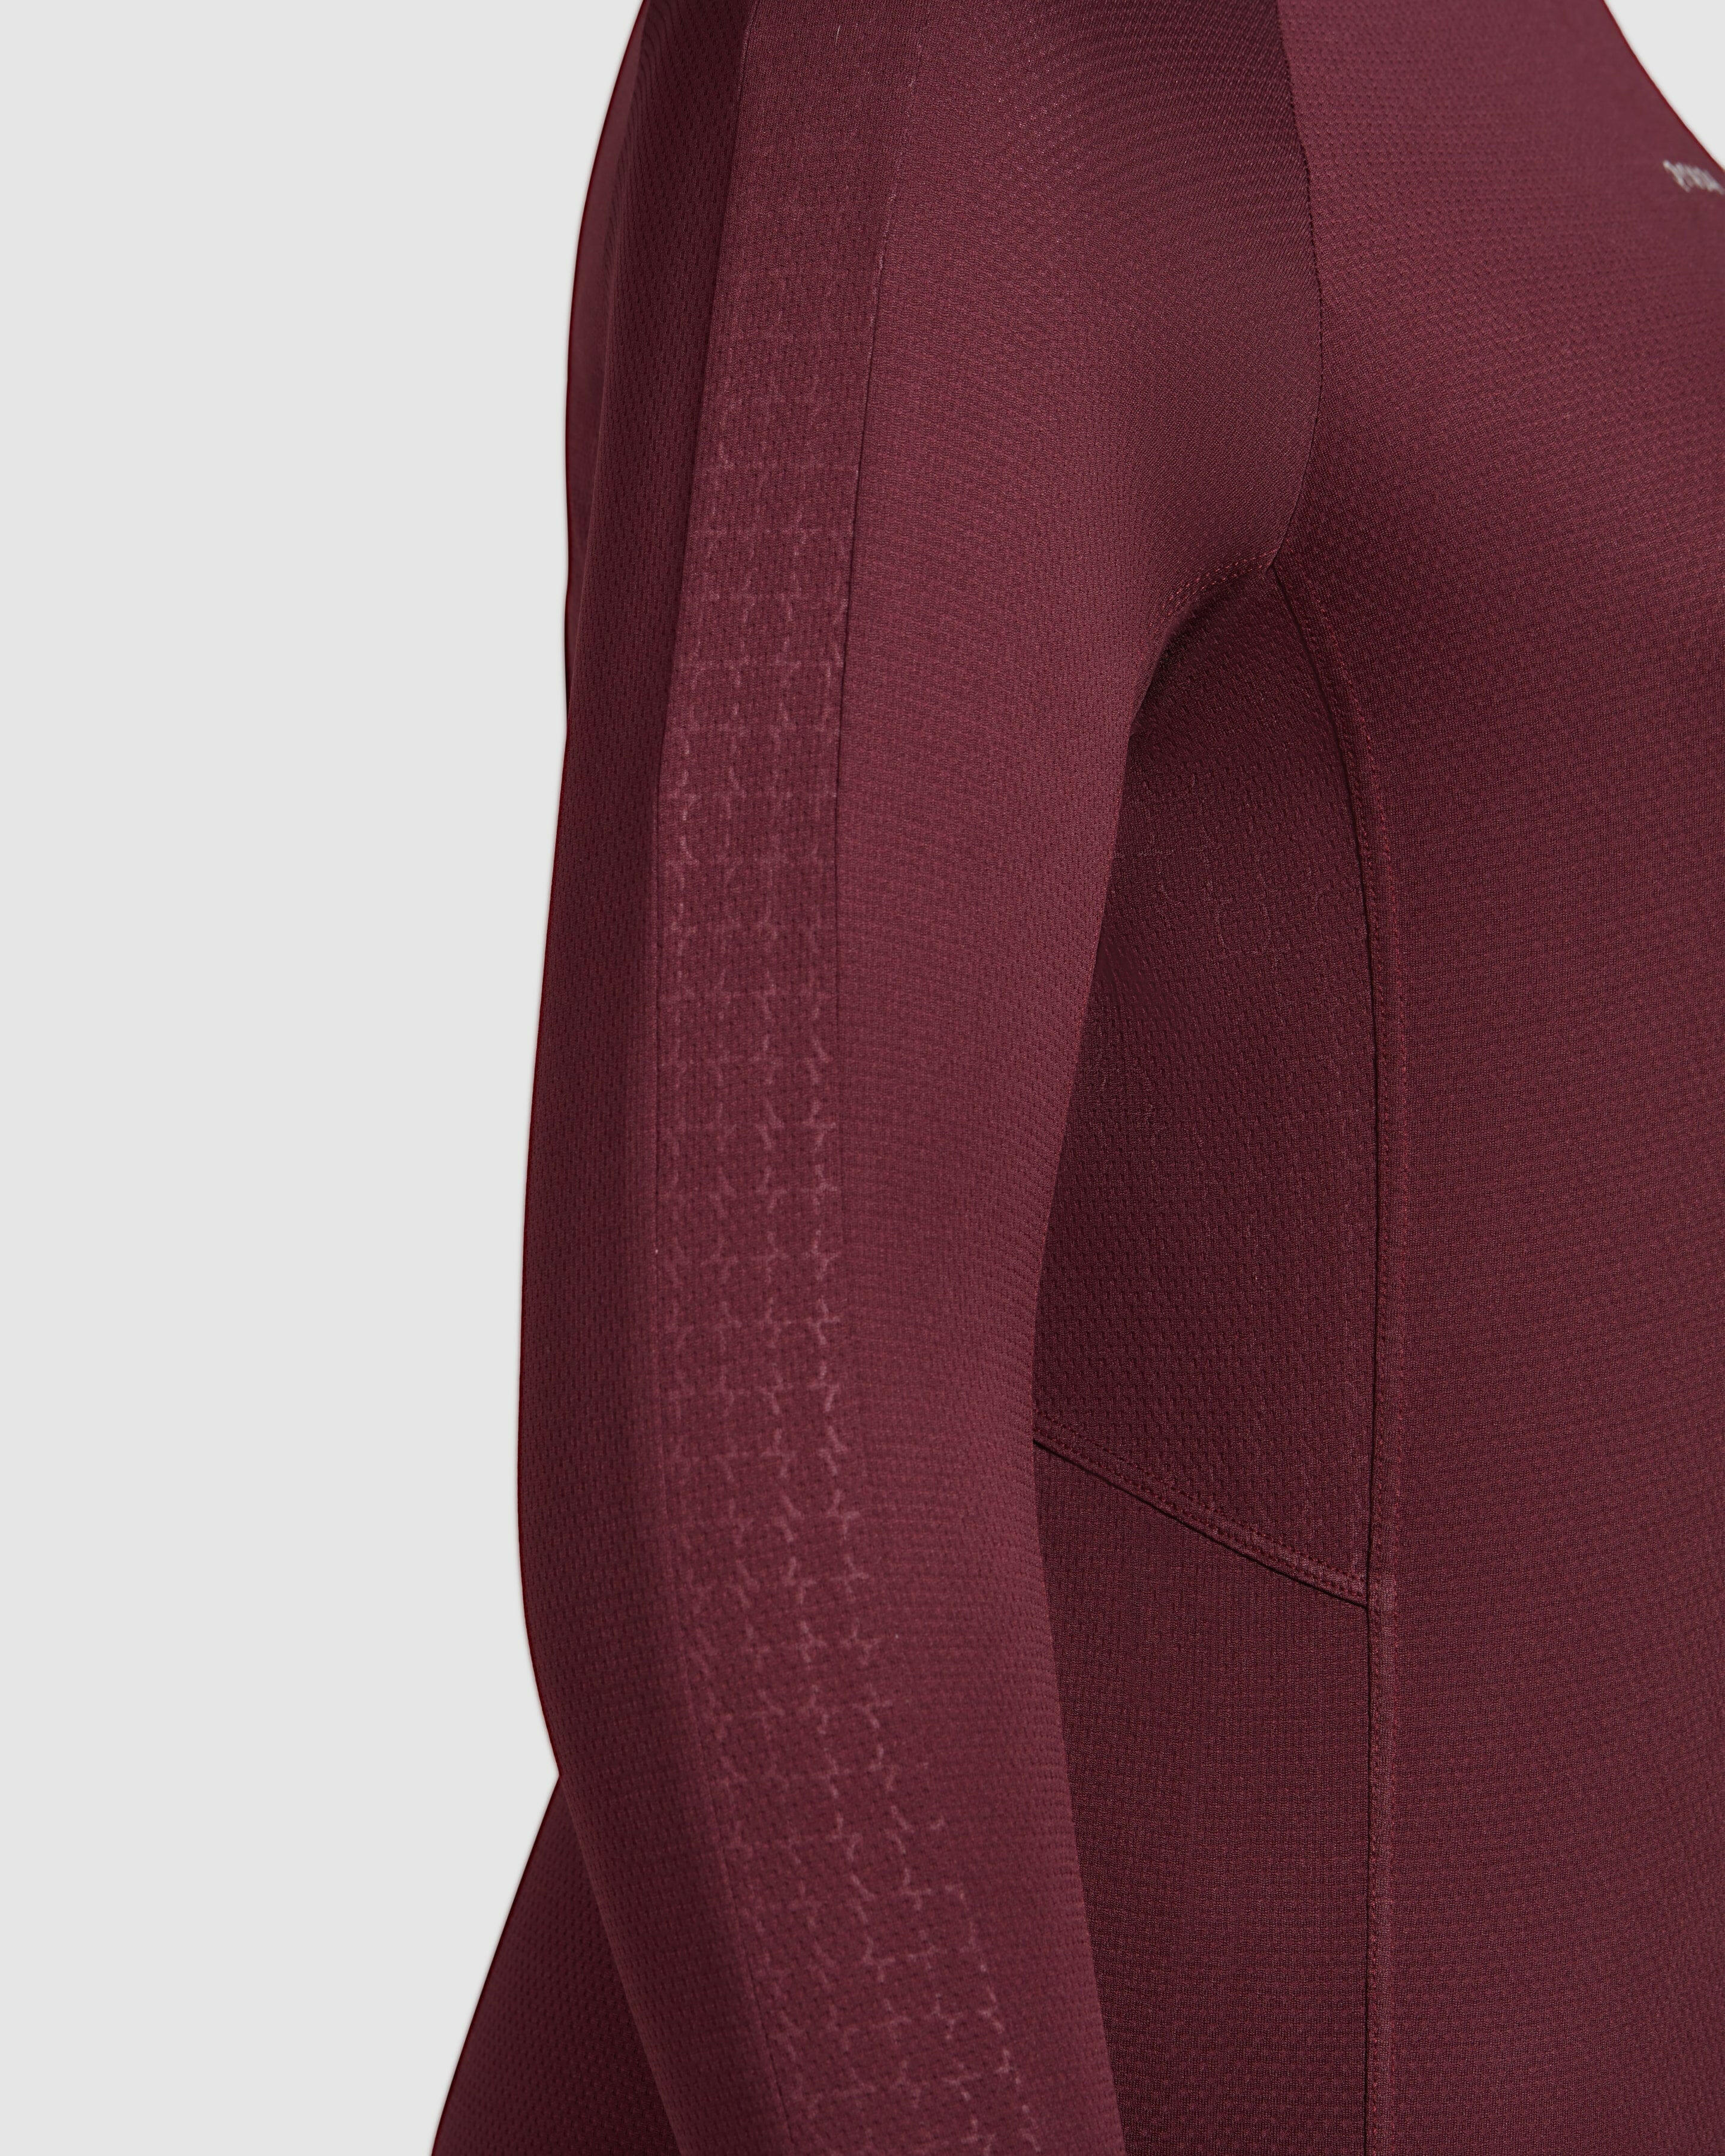 Close-up view of a ACT LONG SLEEVE T-SHIRT with detailed stitching and a qynda logo.